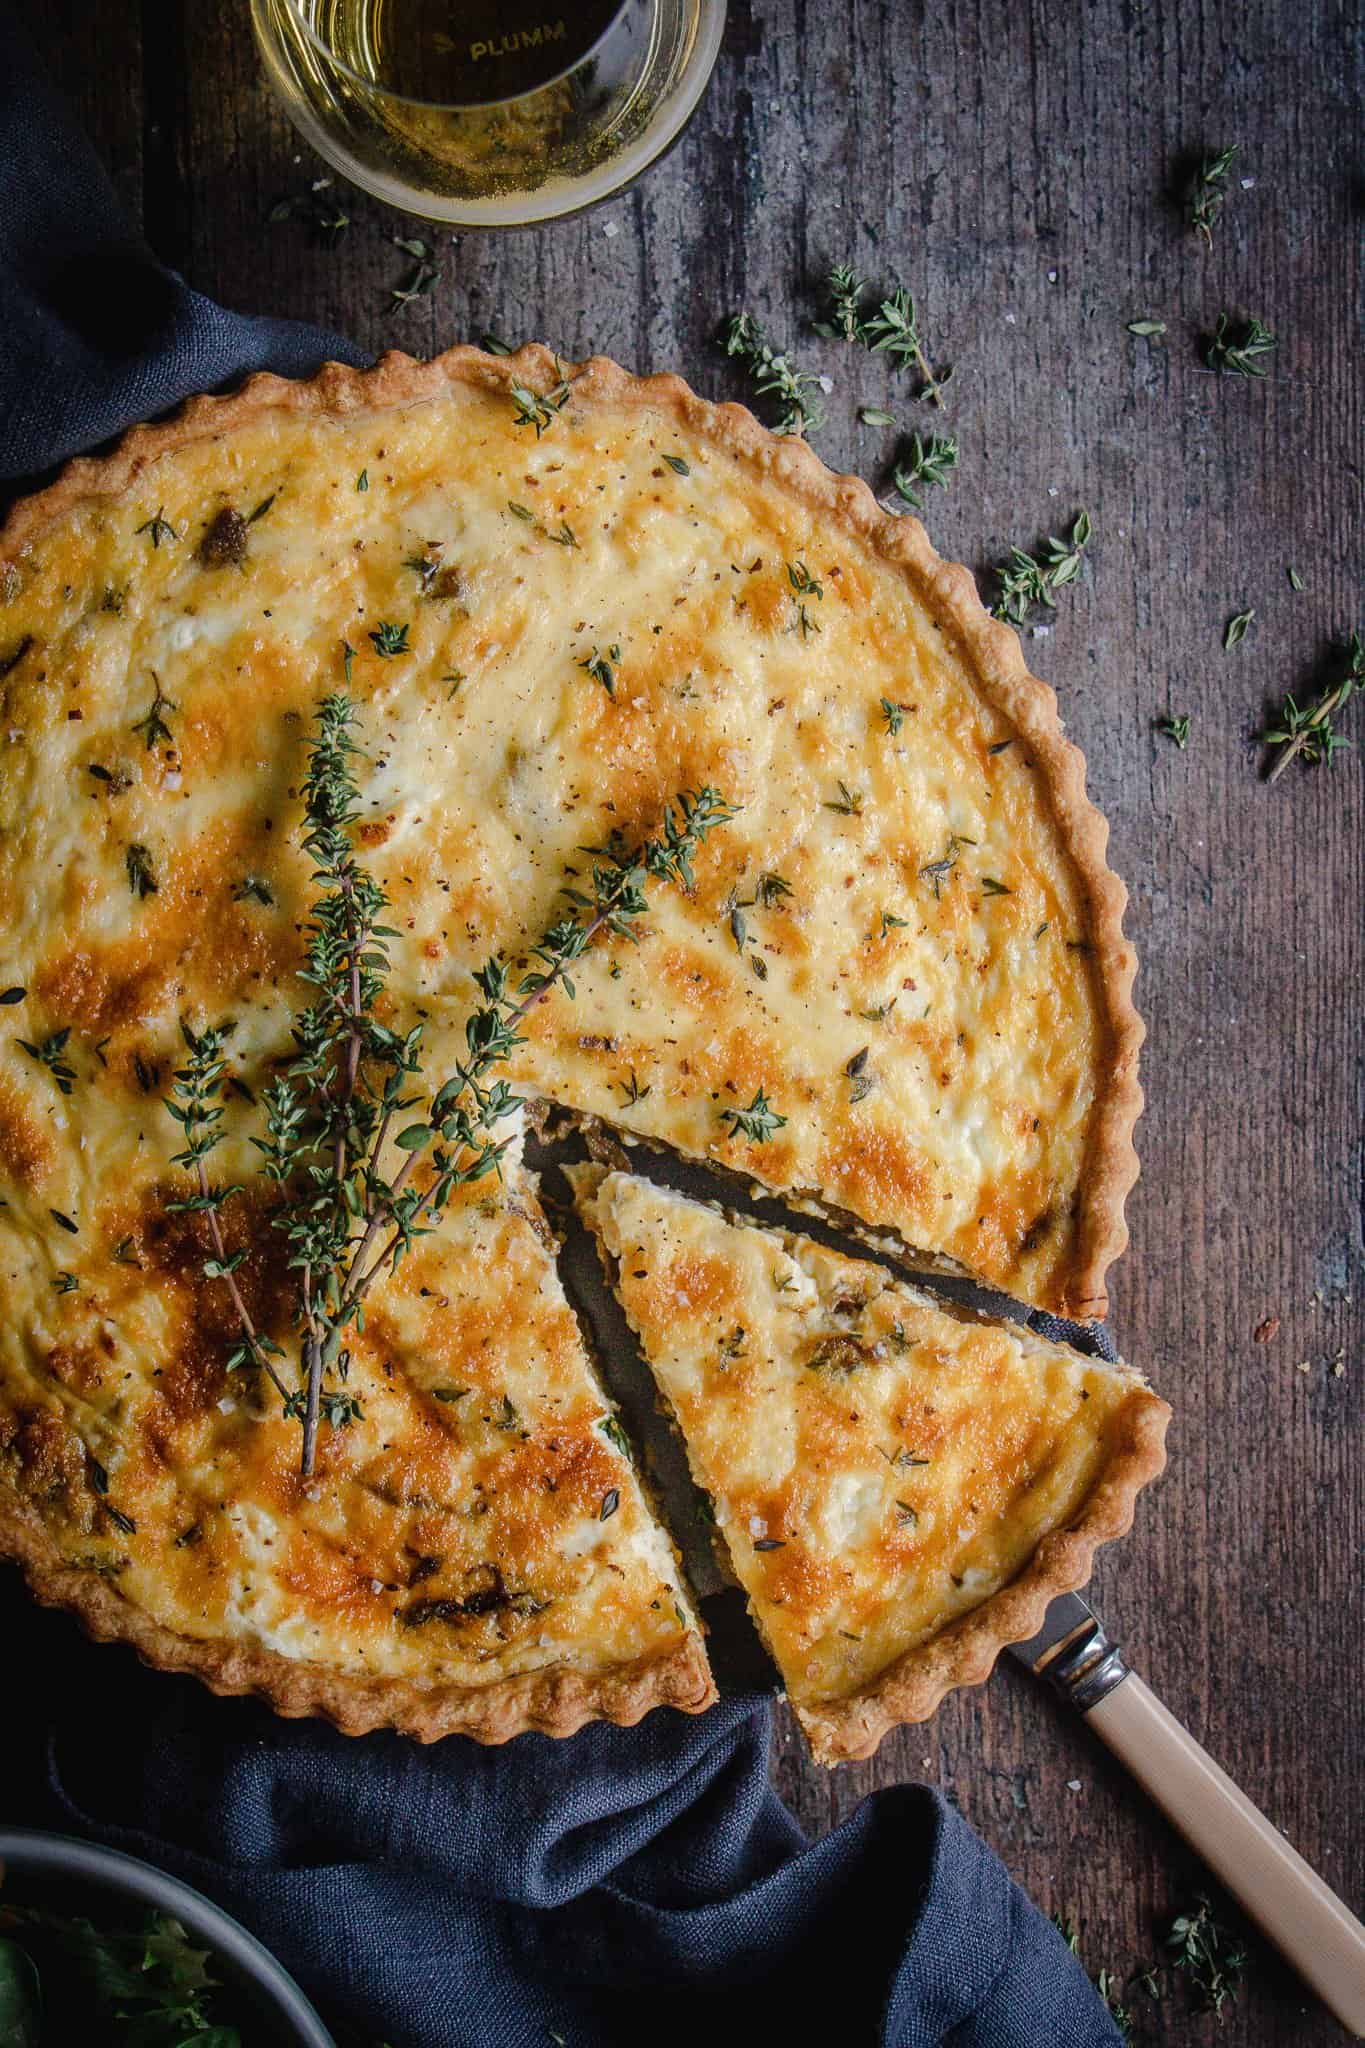 Caramelized-balsamic-onion-and-goats-cheese-tart-2-1